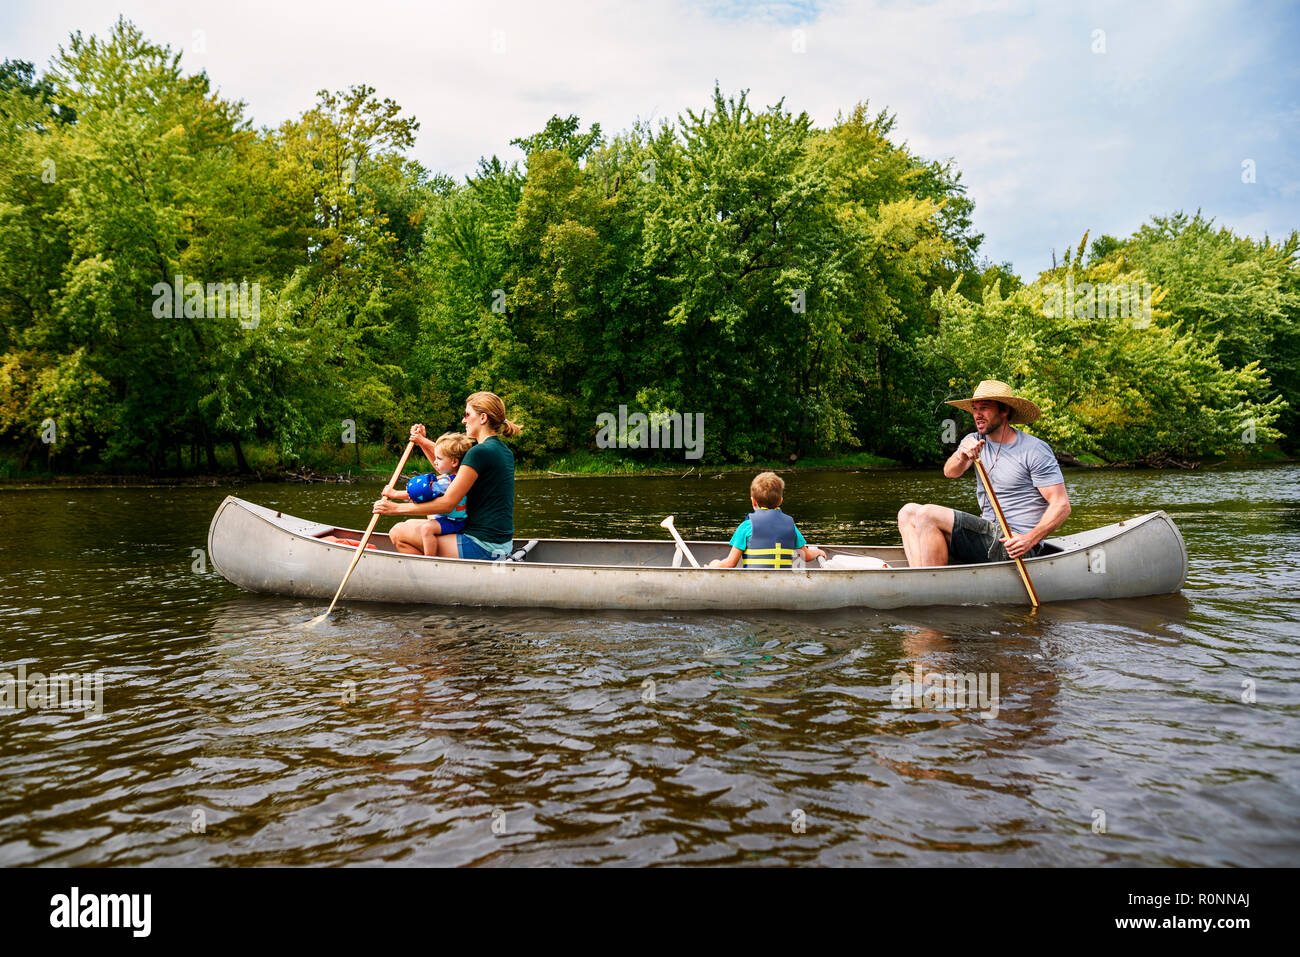 Family with two children canoeing, United States Stock Photo